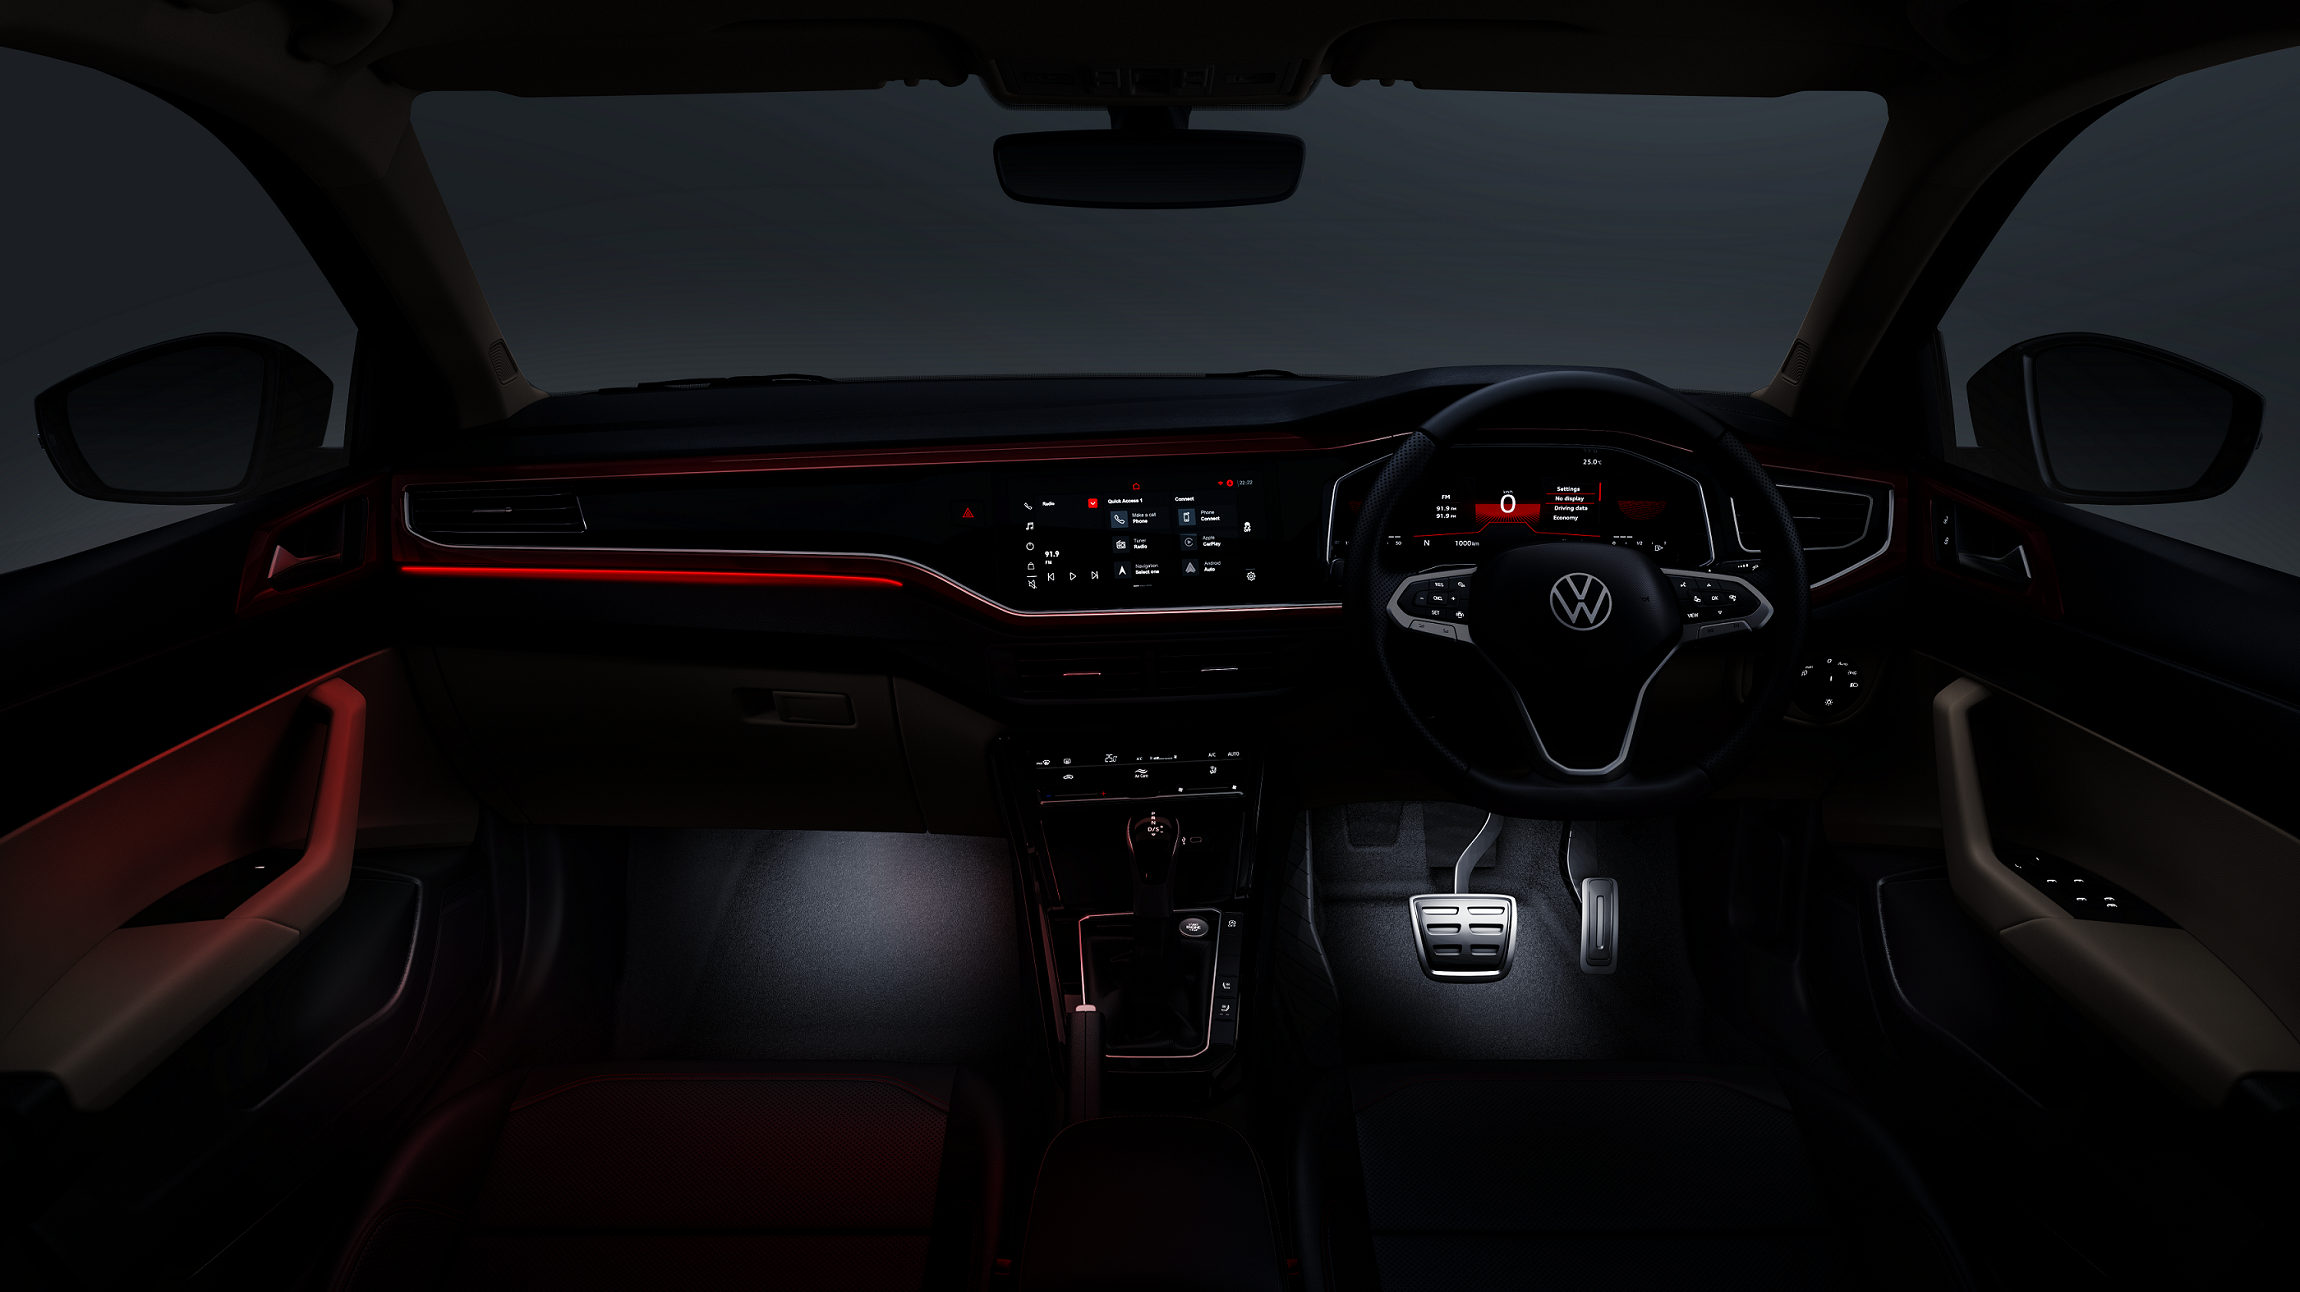 The Taigun and Virtus Dynamic and Performance Line get twin electric front seats and illuminated footwell 